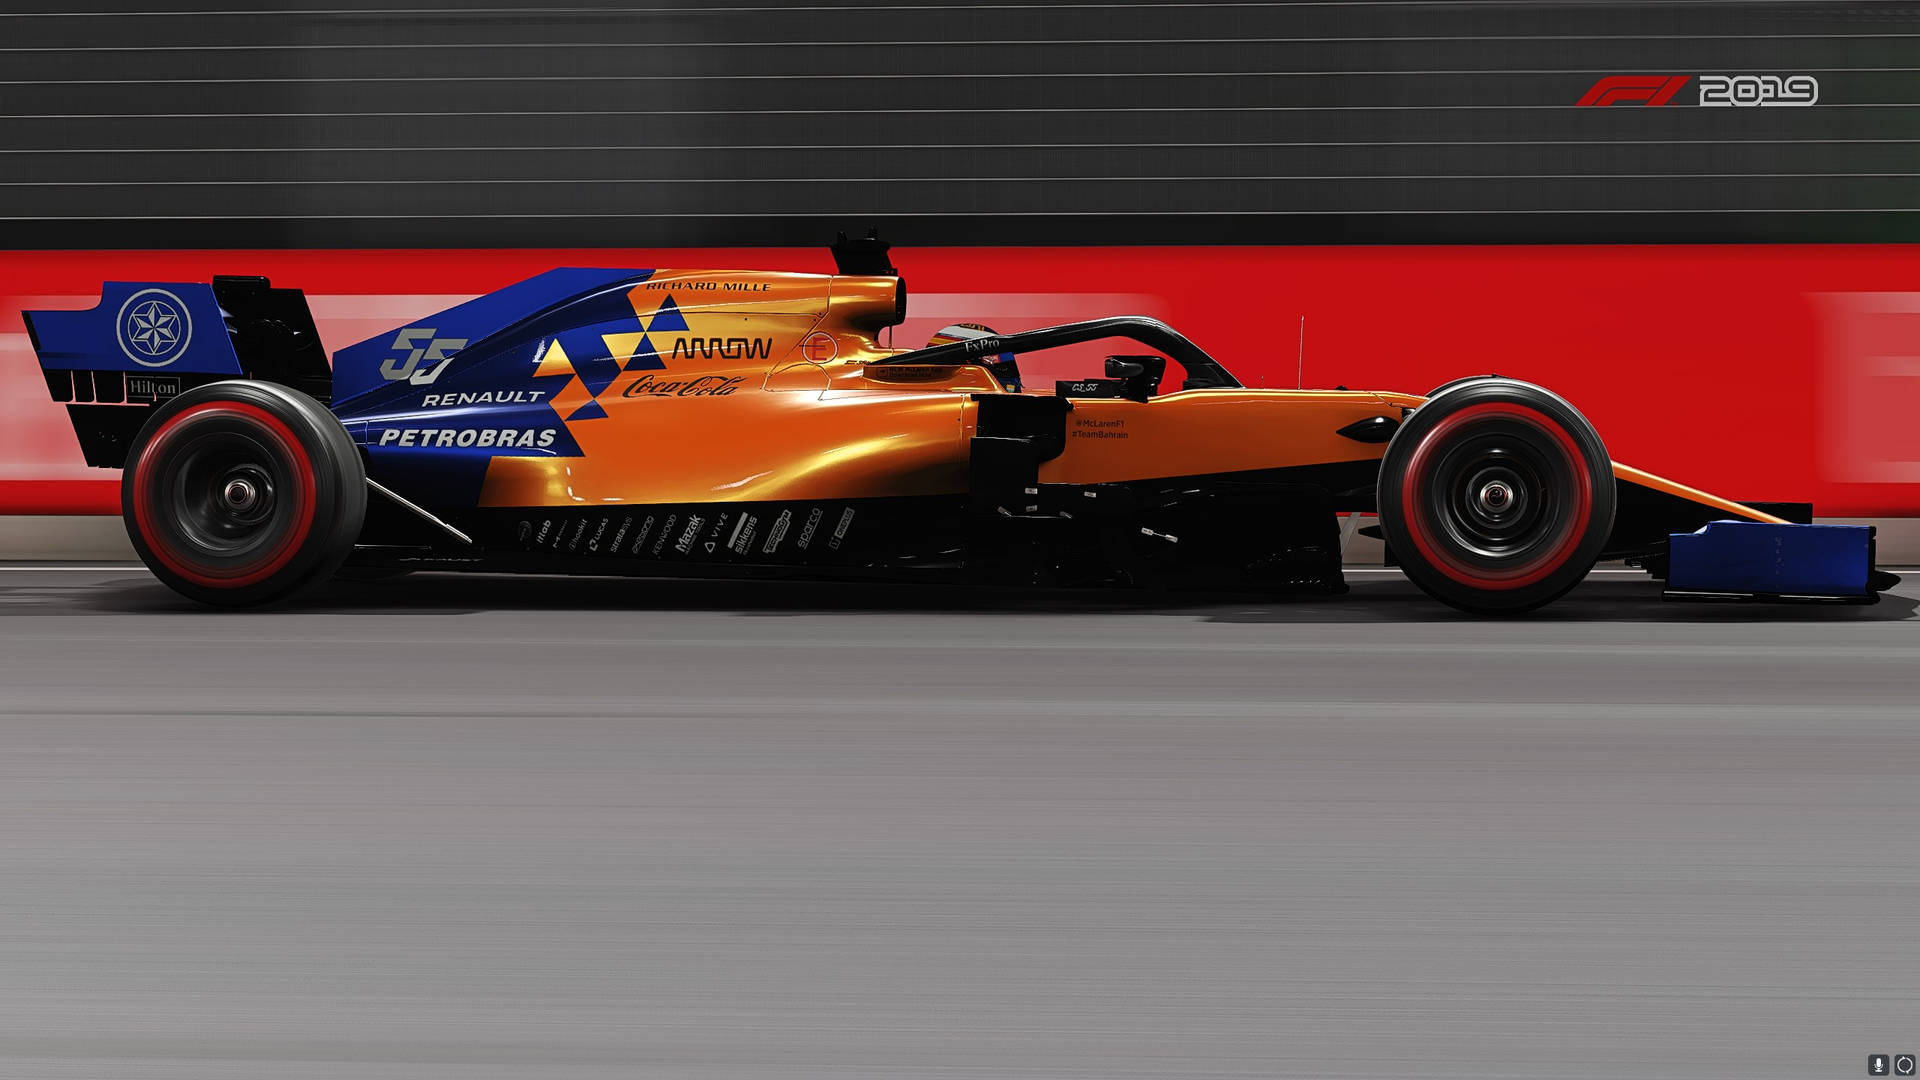 #55 Car In-game F1 2019 Background